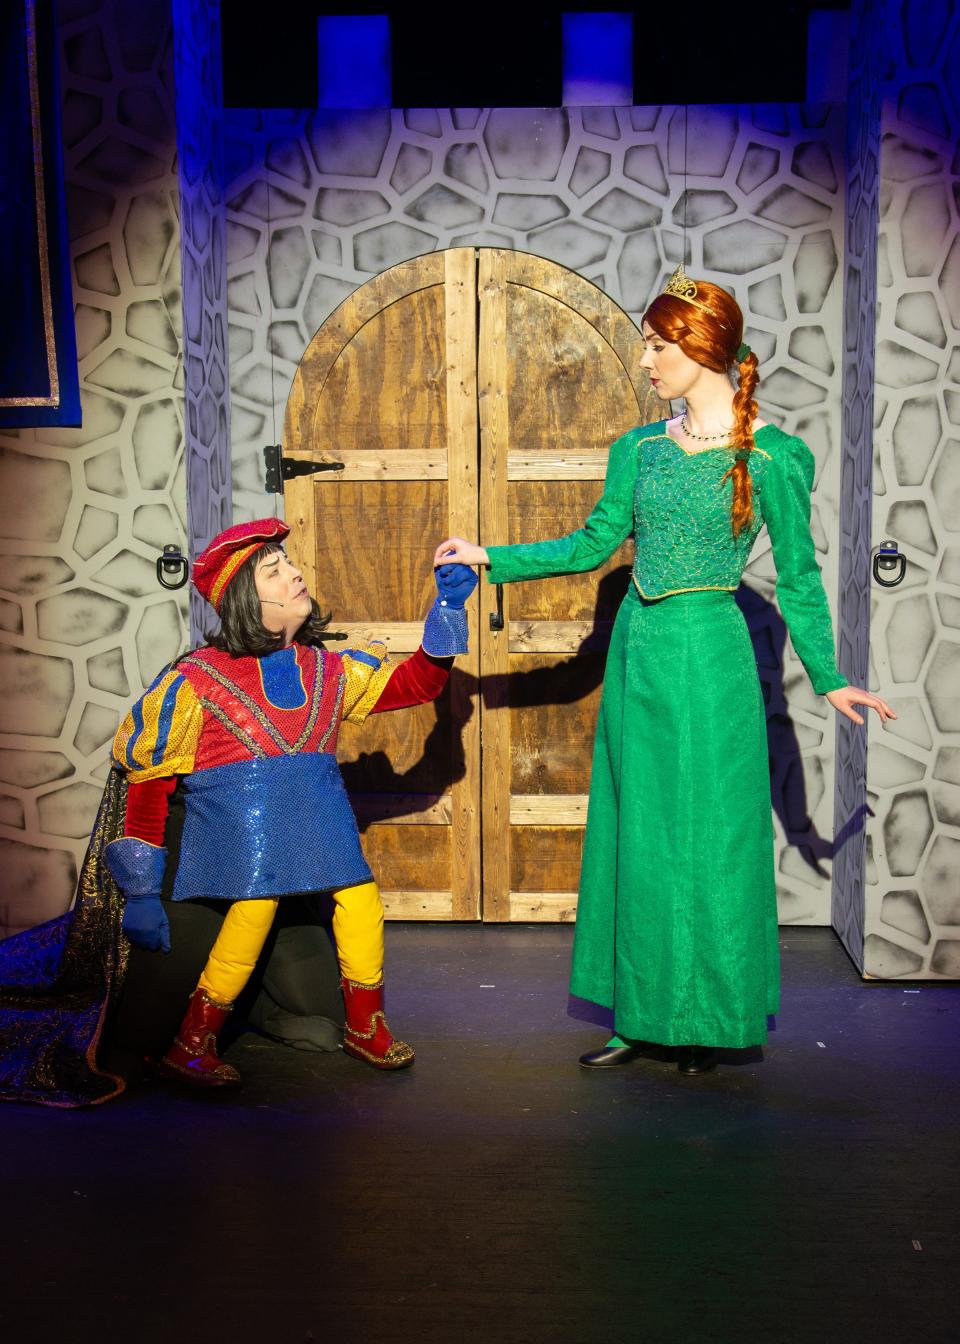 Hillary Marshall and David DeWitt play Princess Fiona and Lord Farquaad  in Stage Crafters' production of "Shrek The Musical." The musical runs Oct. 28-30 and Nov. 4-6 at the Fort Walton Beach Civic Auditorium.